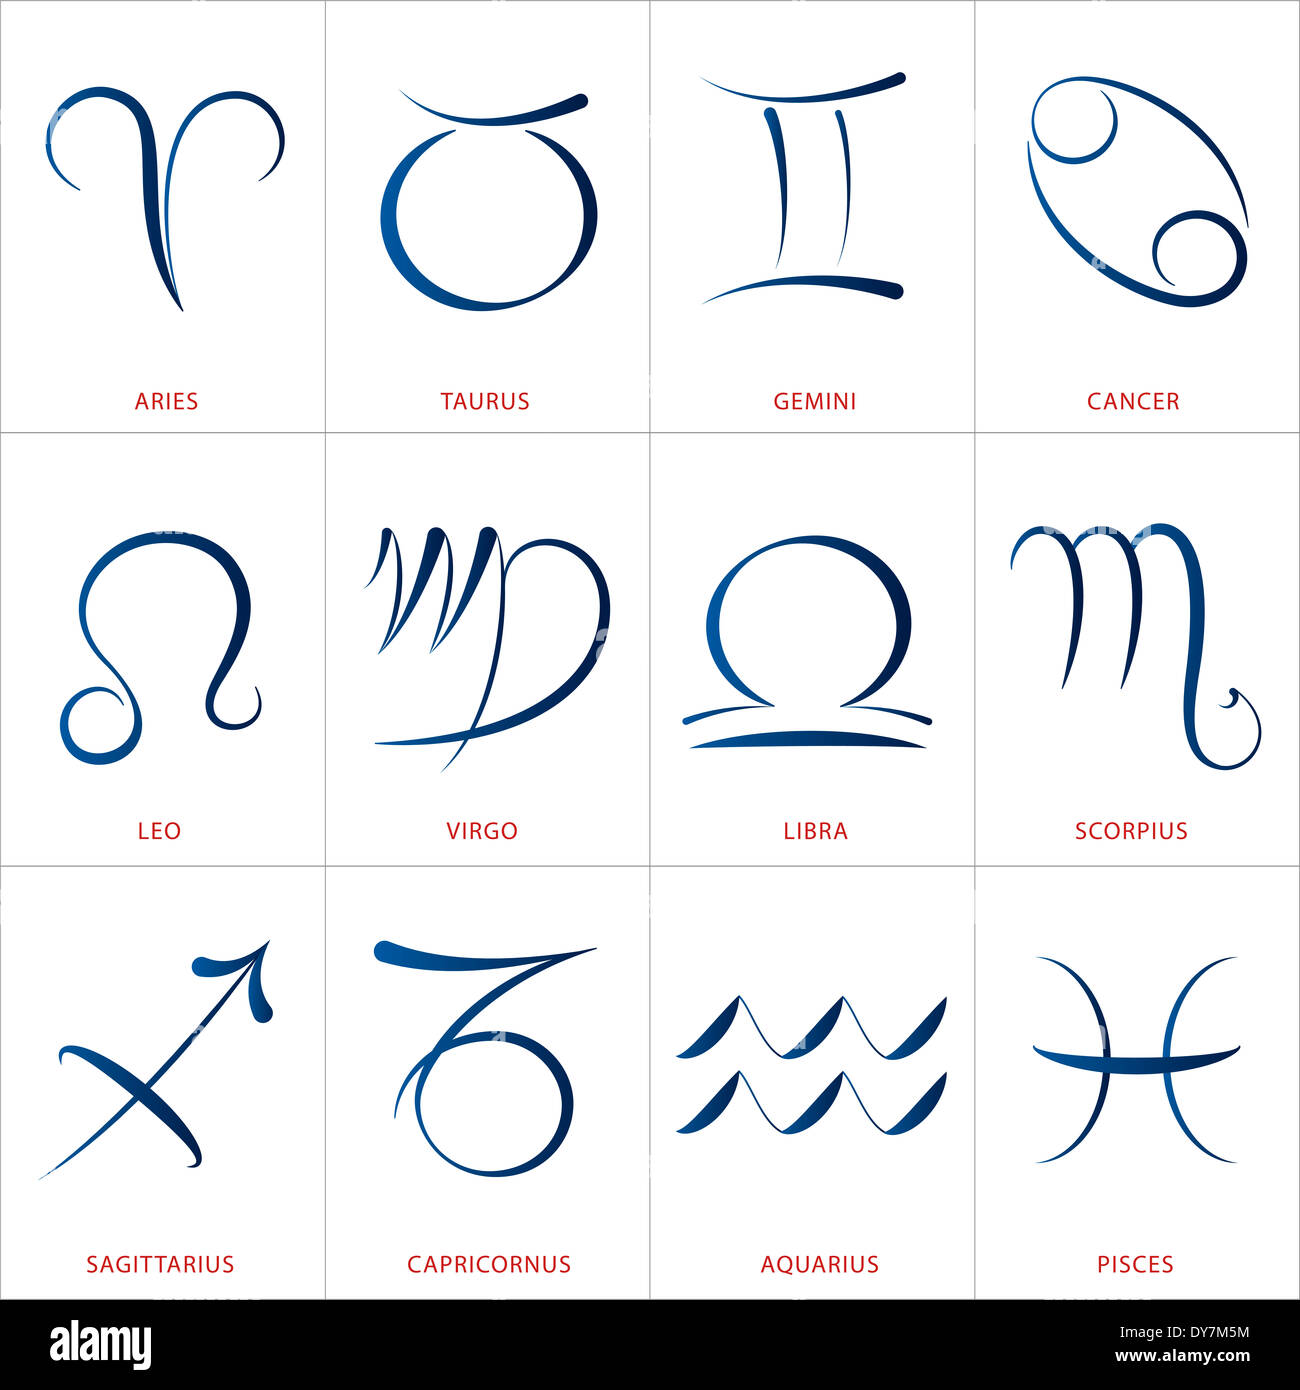 Calligraphic astrology illustrations of the twelve zodiac signs. Stock Photo